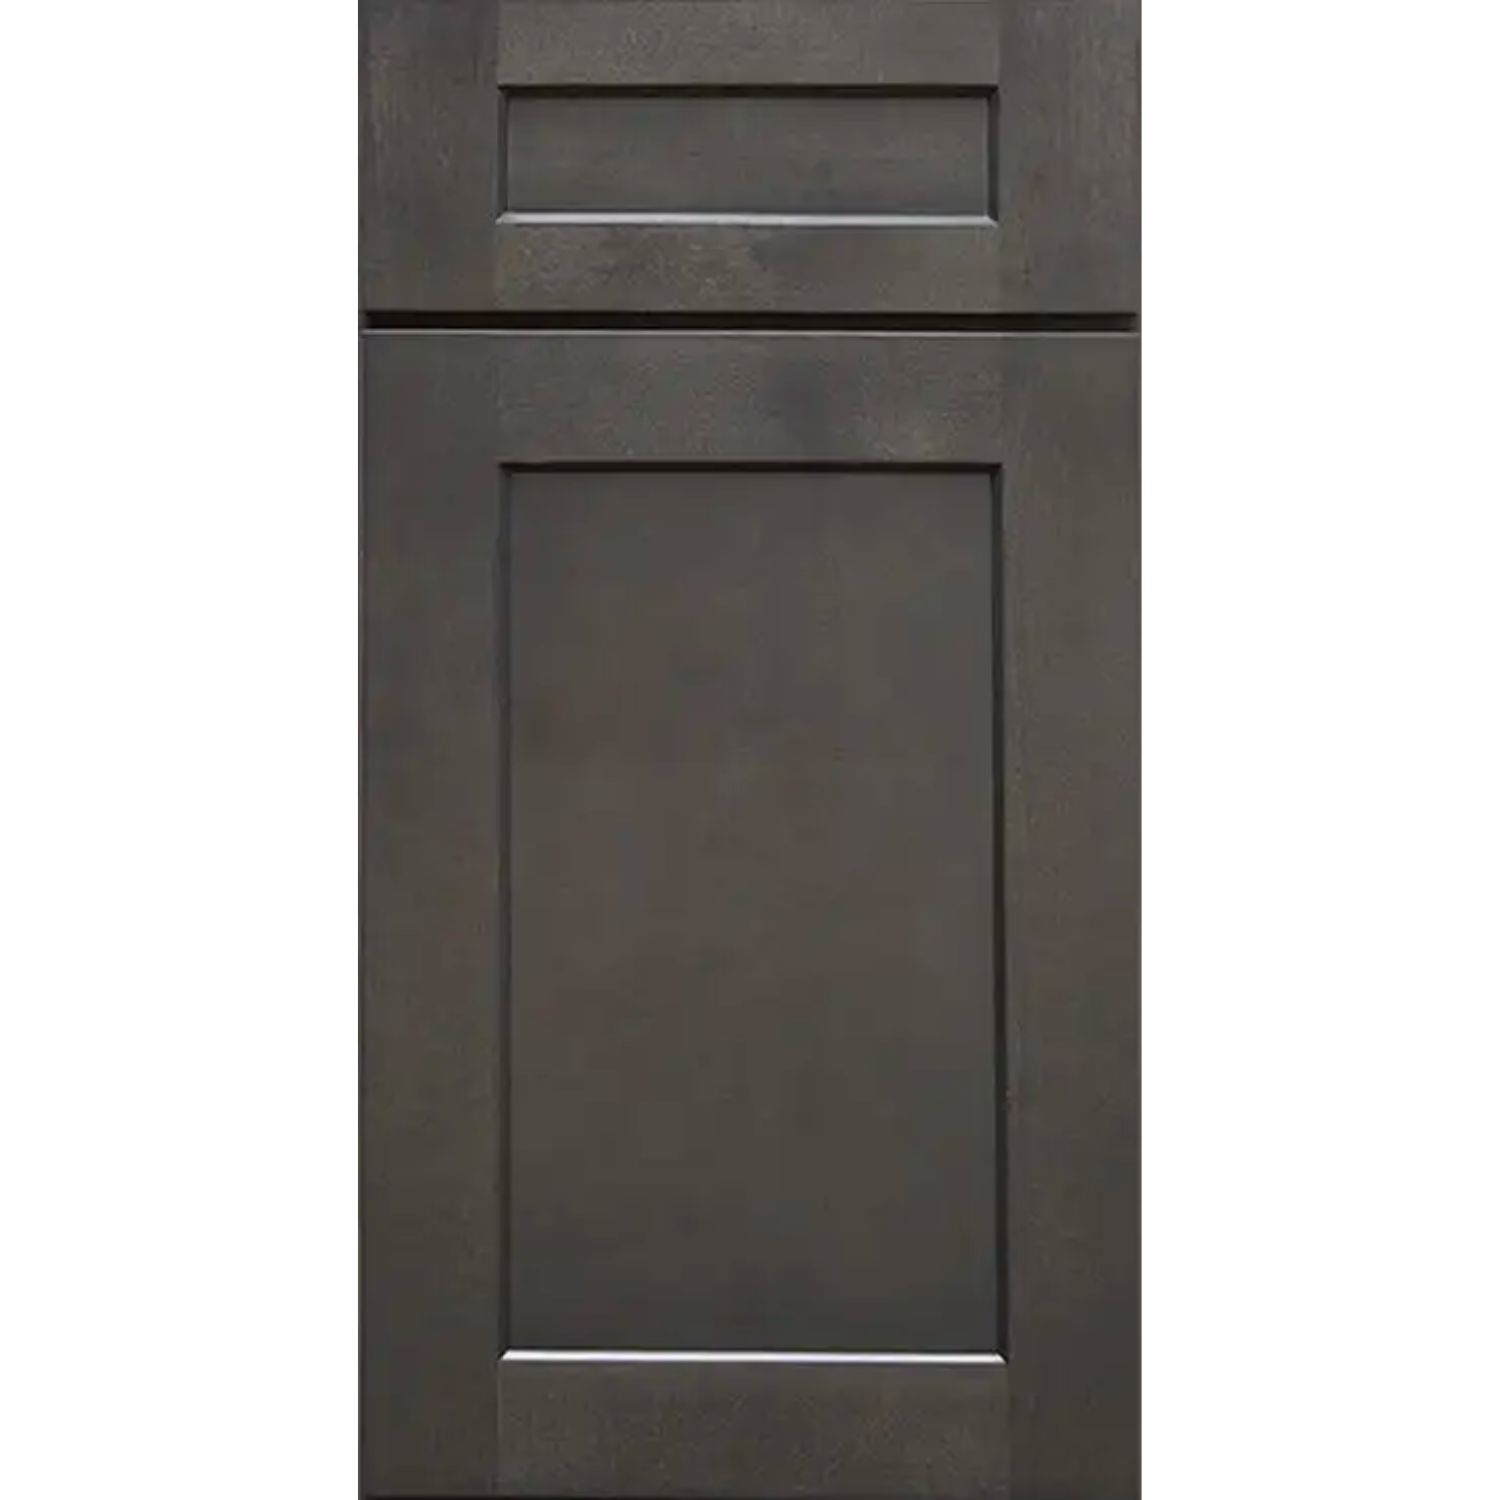 The Best Place to Buy Cabinets Option: CliqStudios